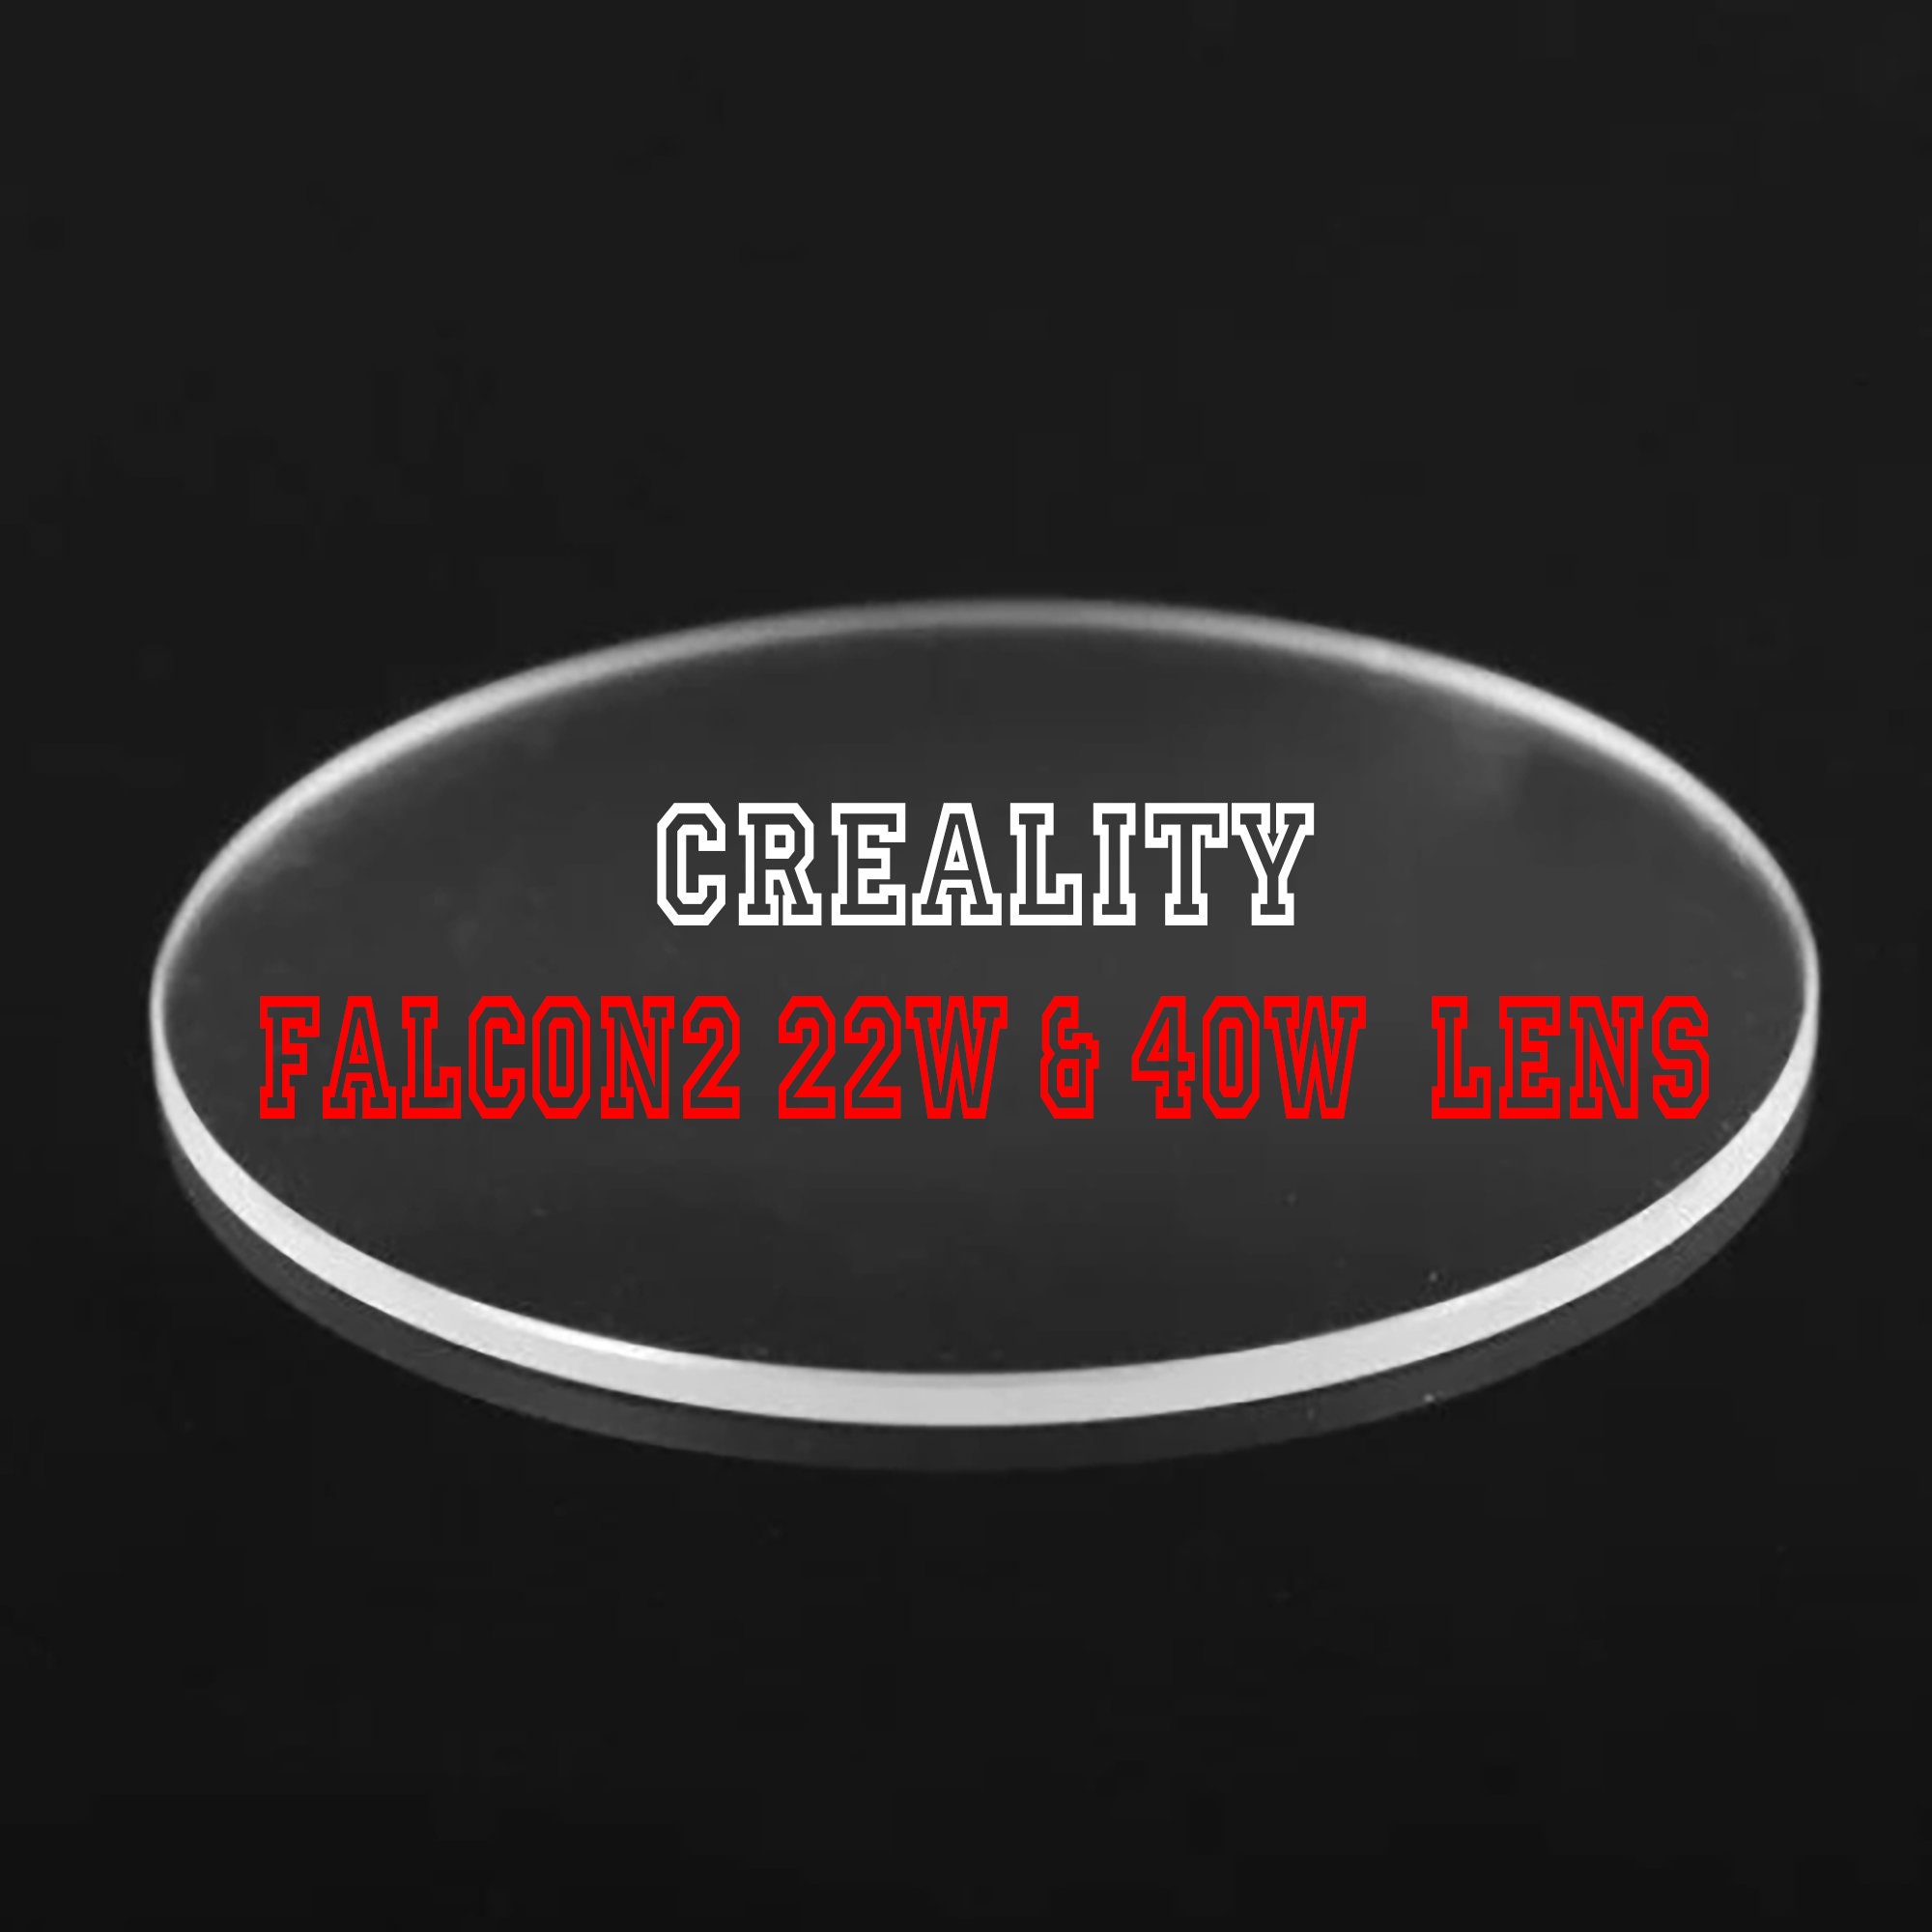 Lens for Creality Falcon2 Flat Mineral Crystals Glass Anti Scratch Coating Creality  Falcon2 22W, 40W Lens Falcon 2 Lens 